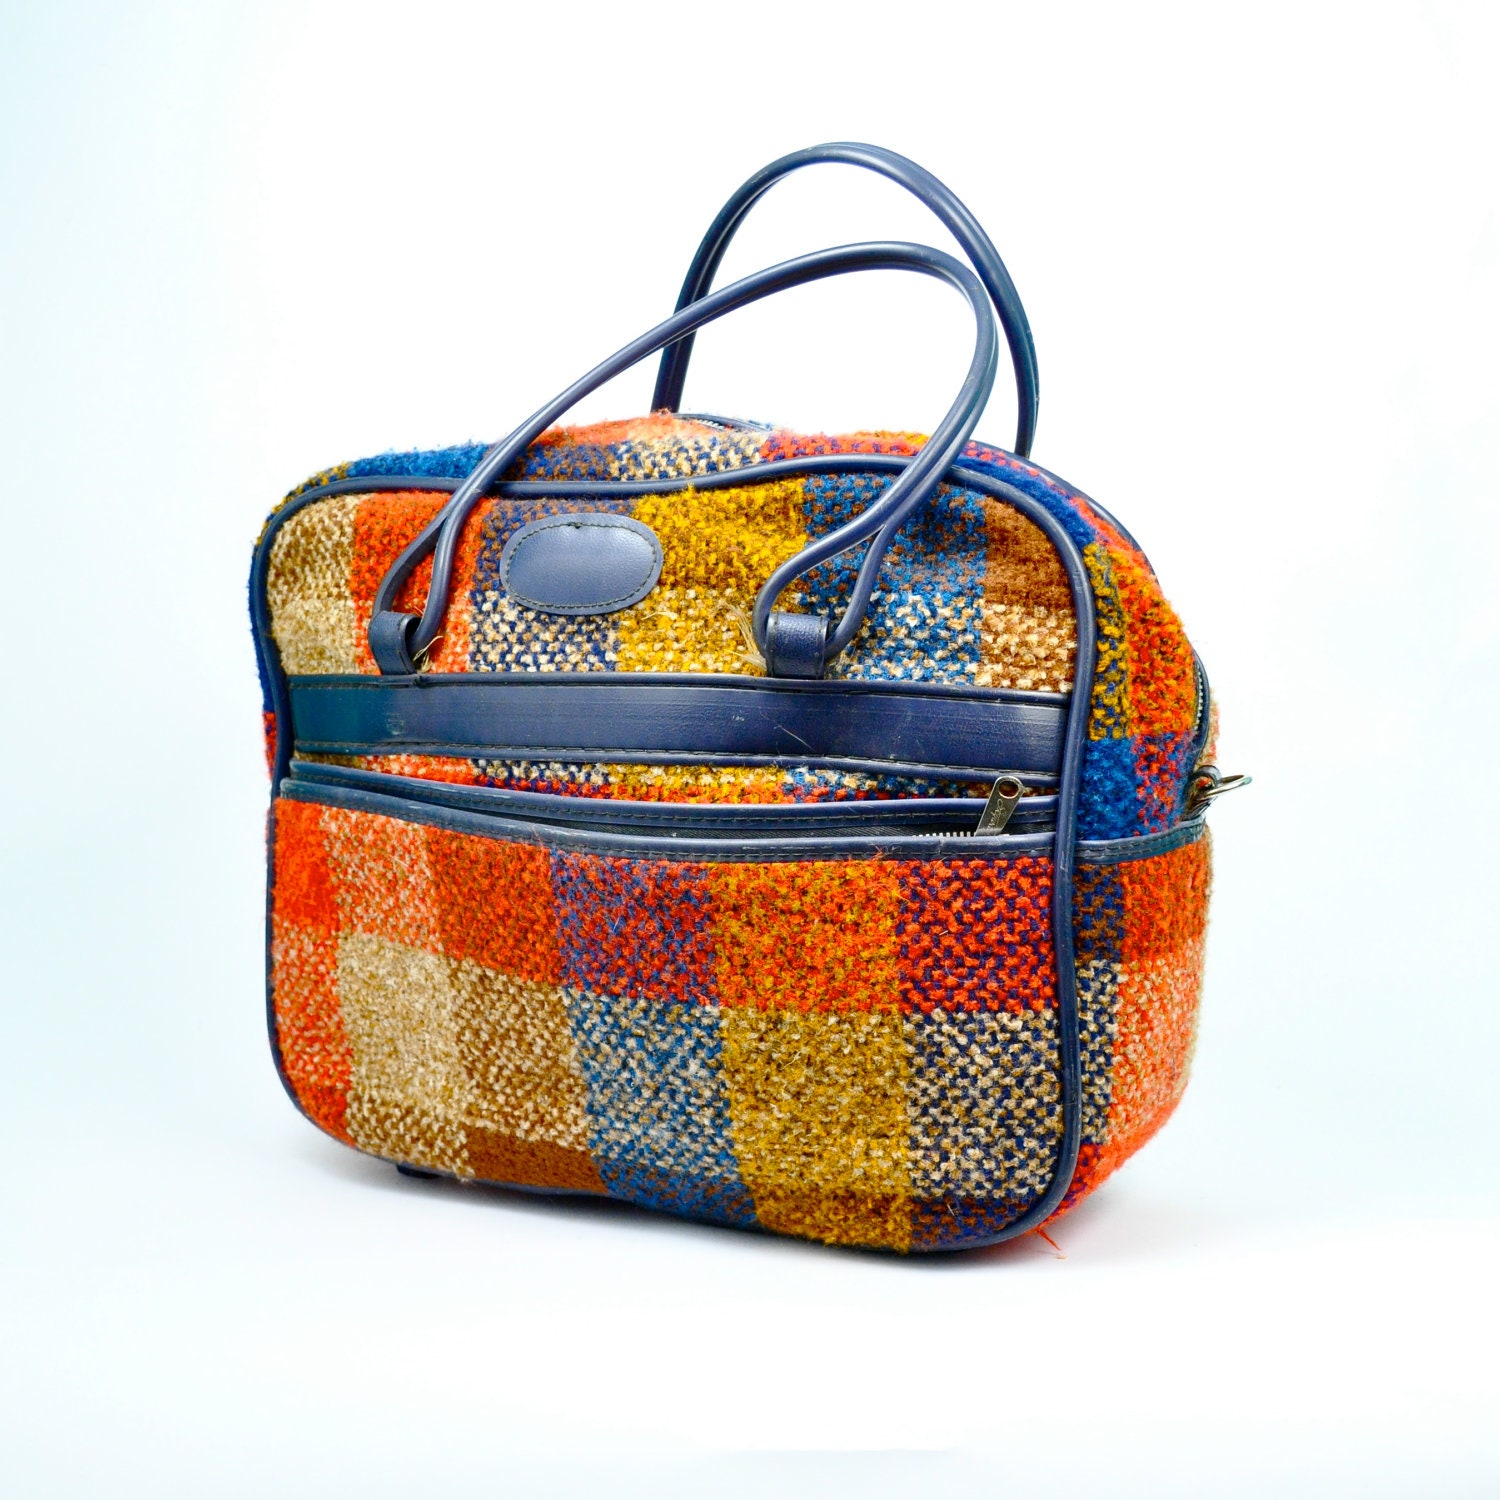 Vintage 1960's BRIGHT PLAIDS Carry-on Tote Bag